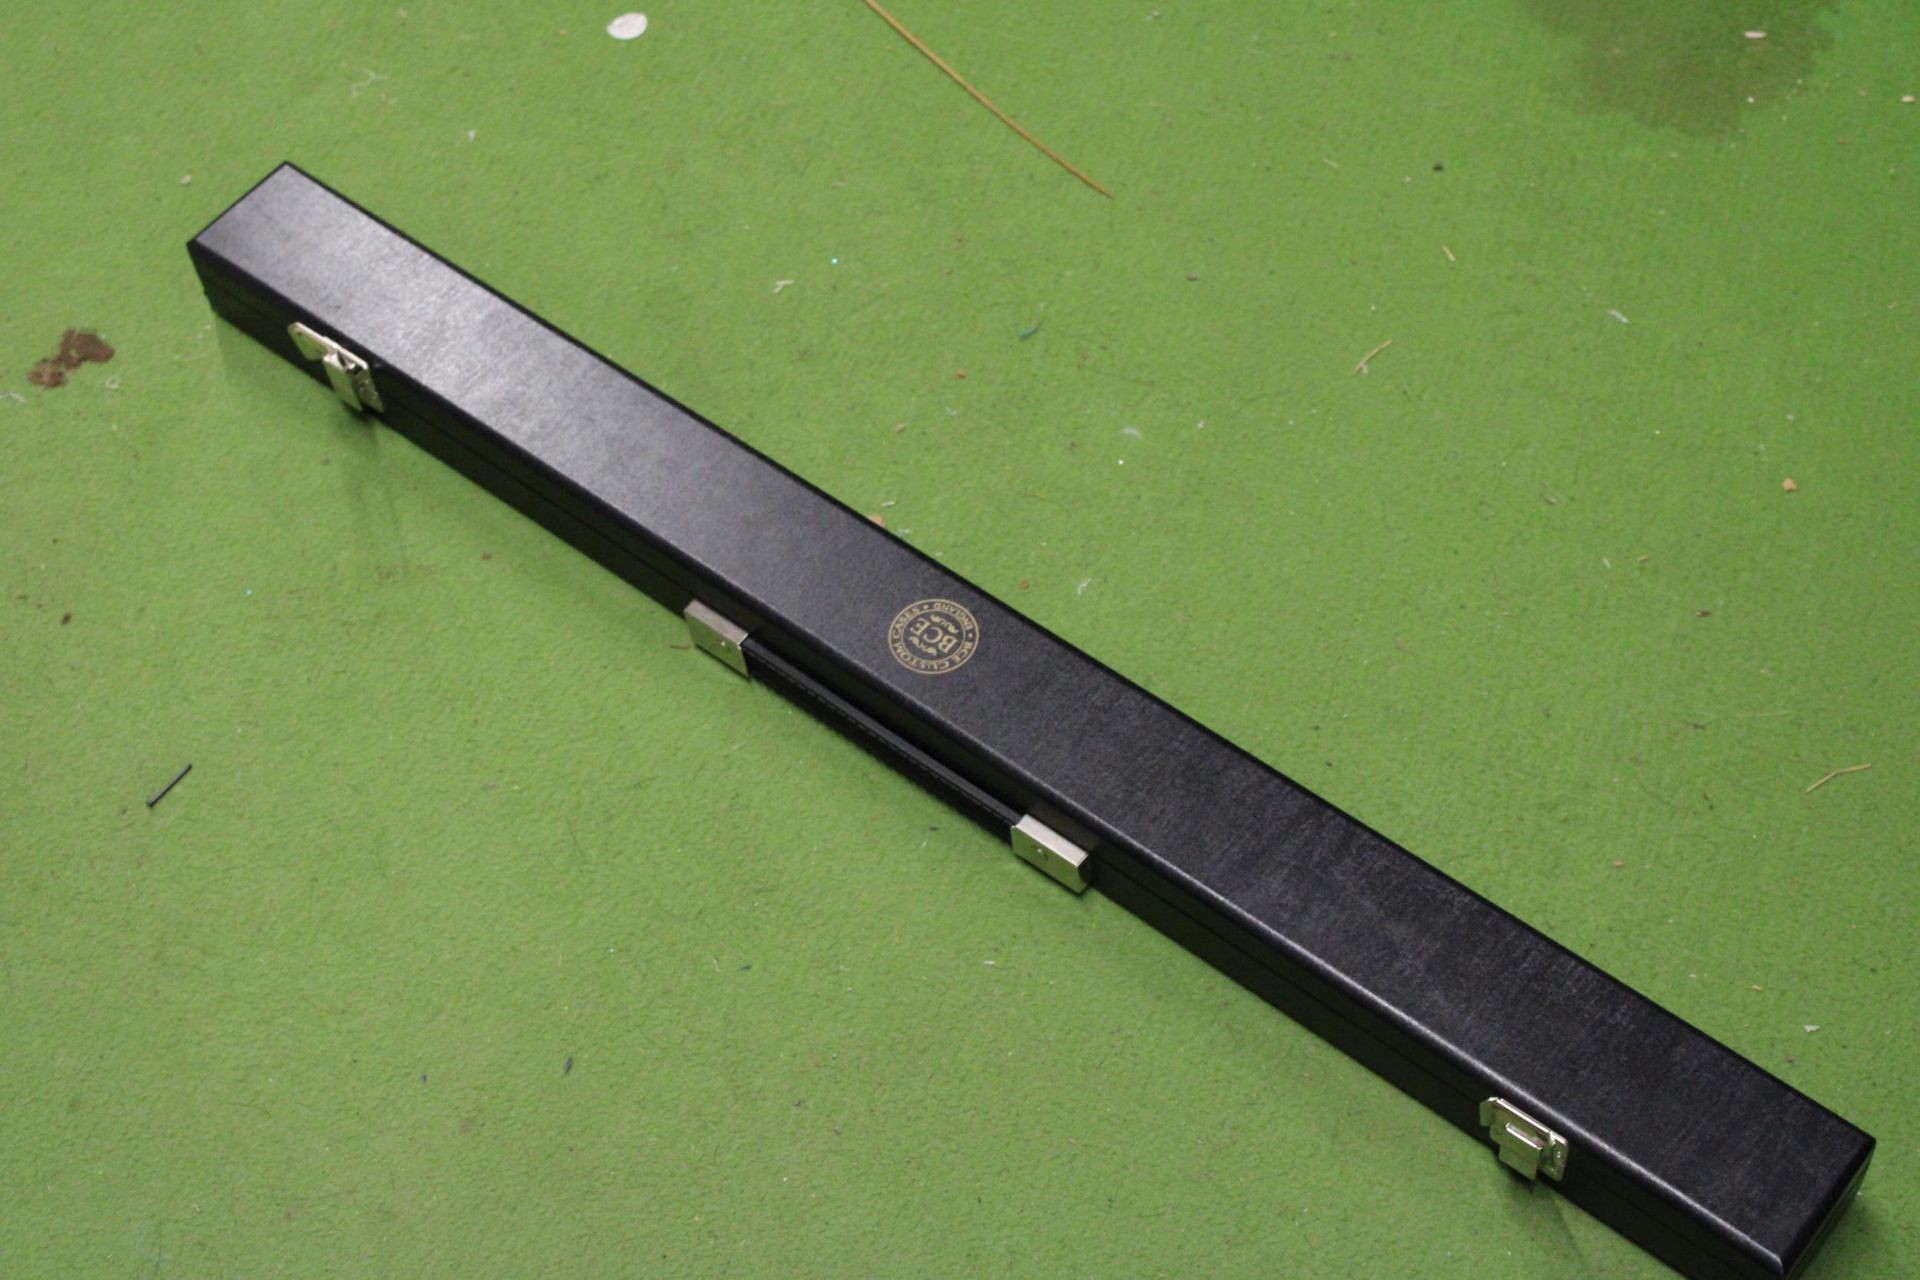 A STINGER DE LUX POOL CUE IN A HARD CASE - Image 5 of 6